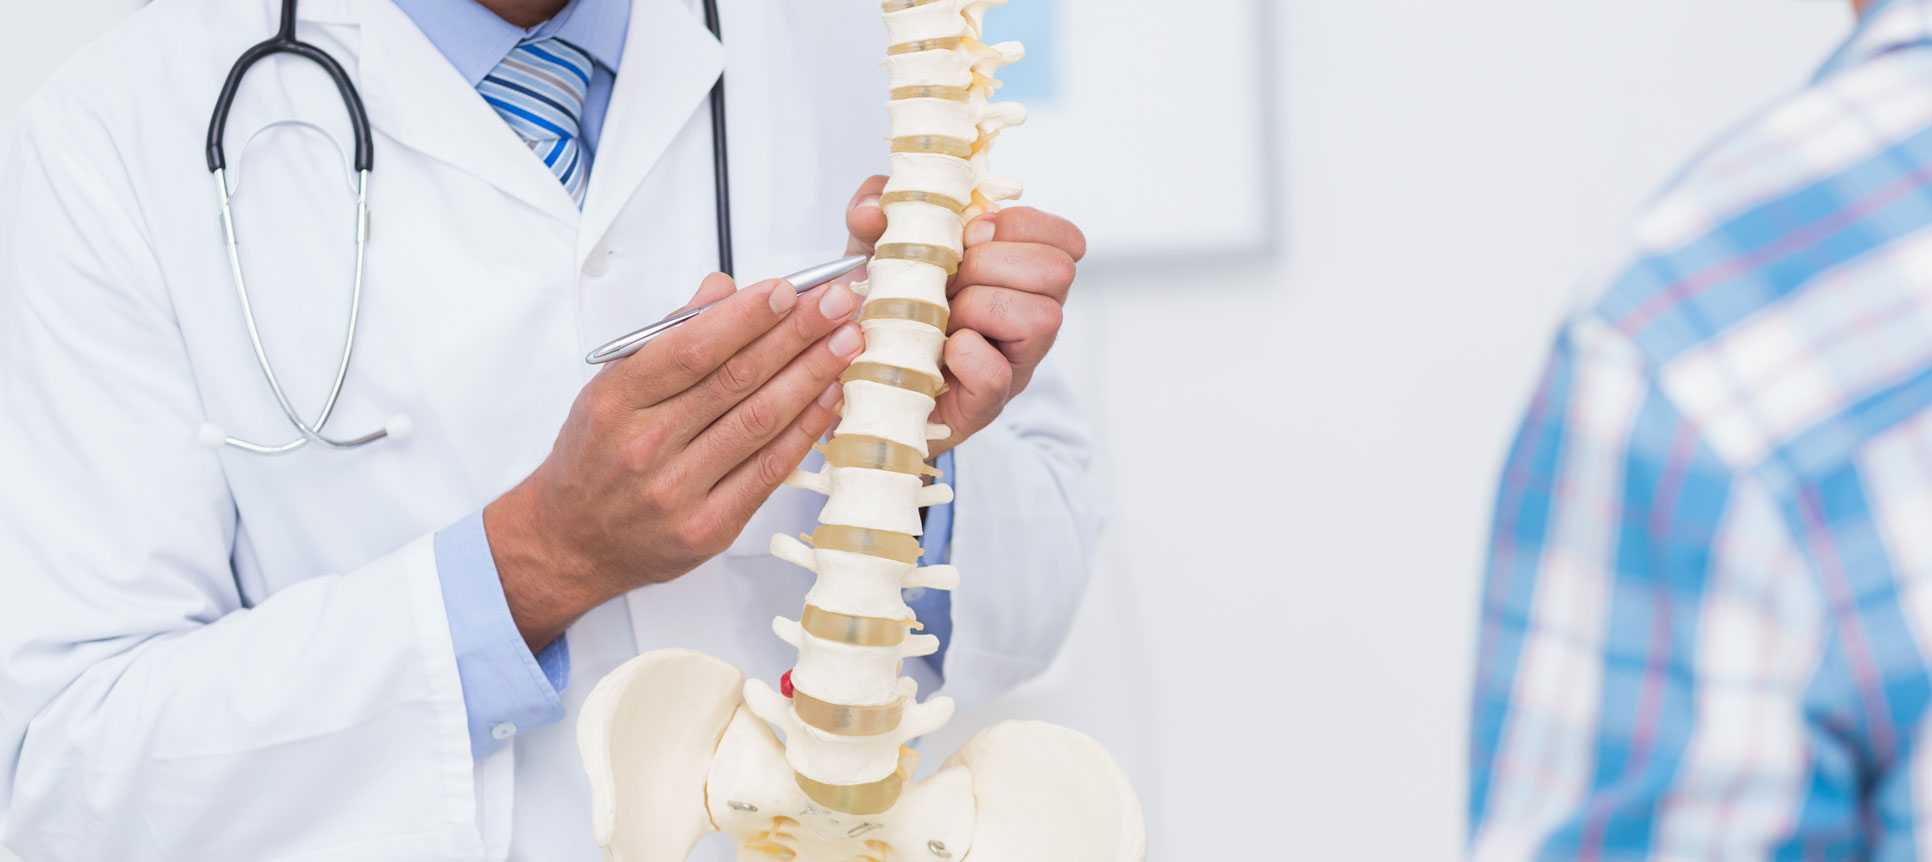 Should You See a Chiropractor for Back Pain? | Duke Health